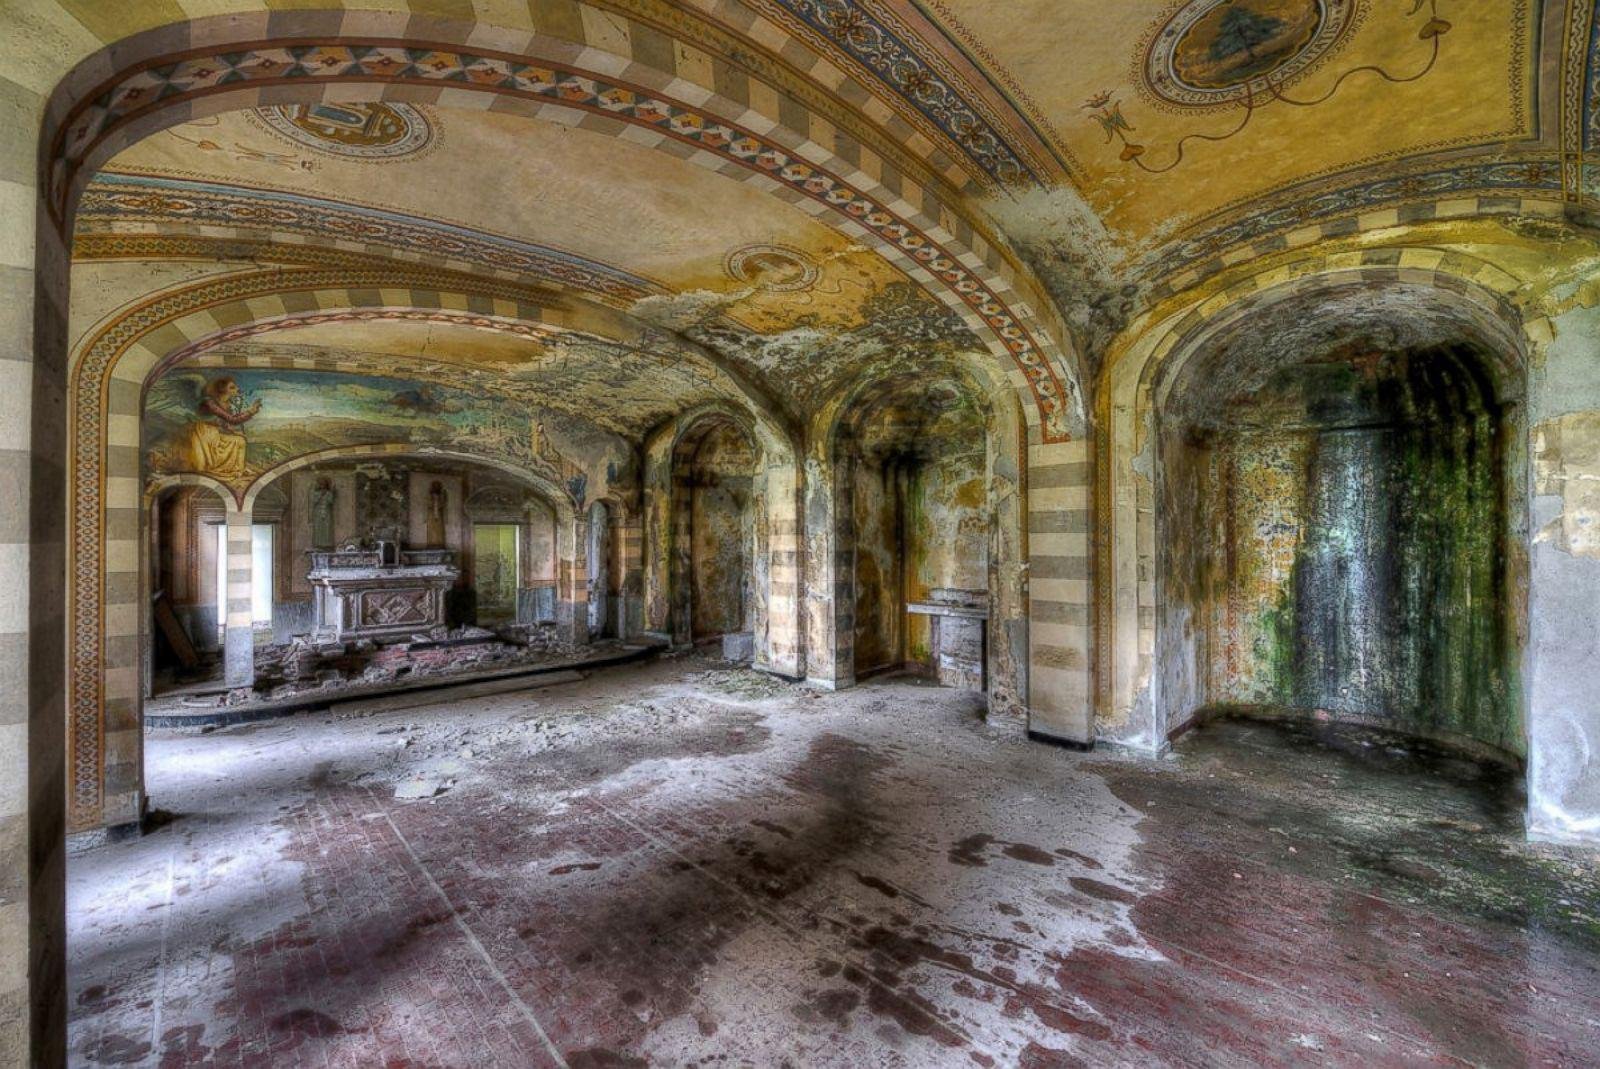 Atmospheric Abandoned Places (20 pics)